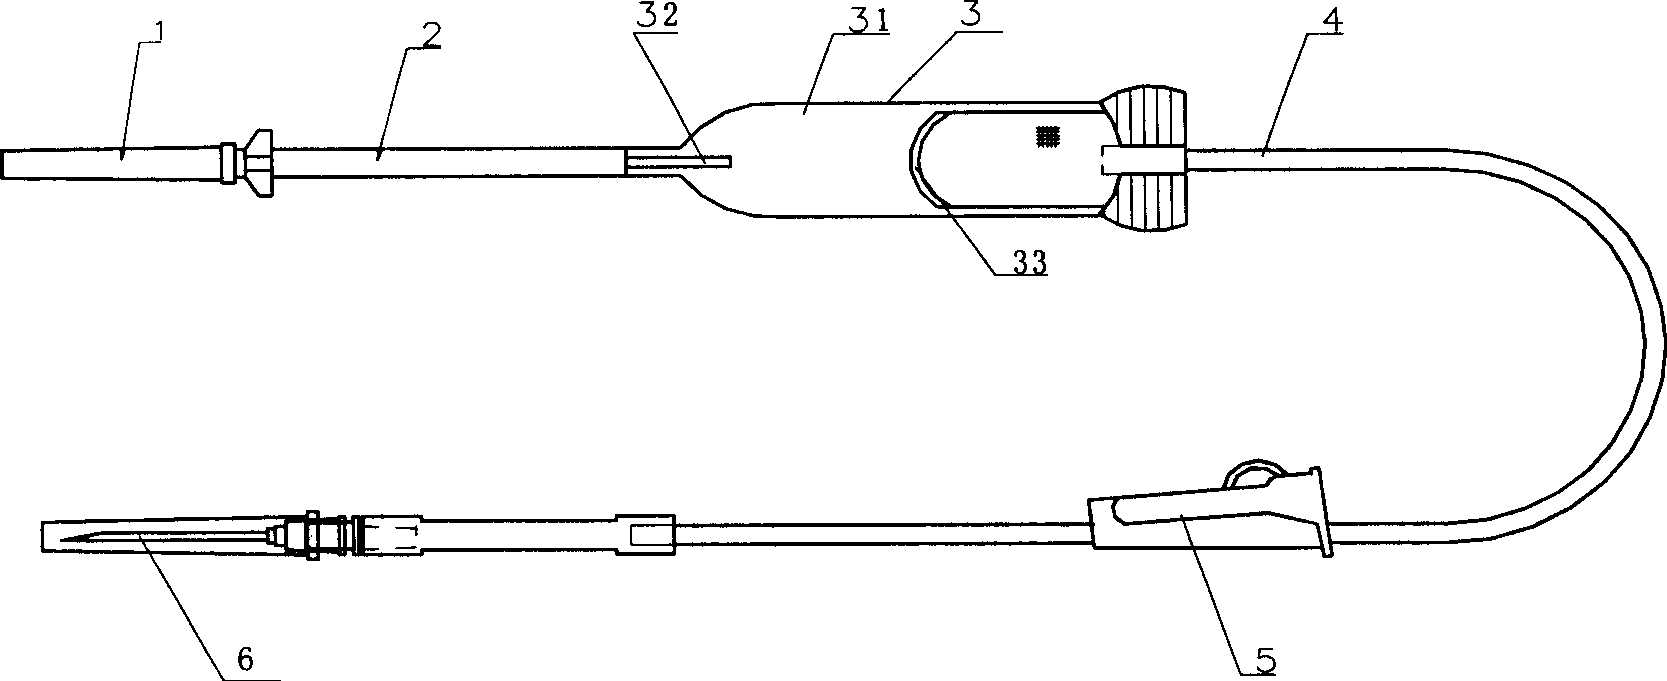 Double-cavity drop funnel blood transfusion device